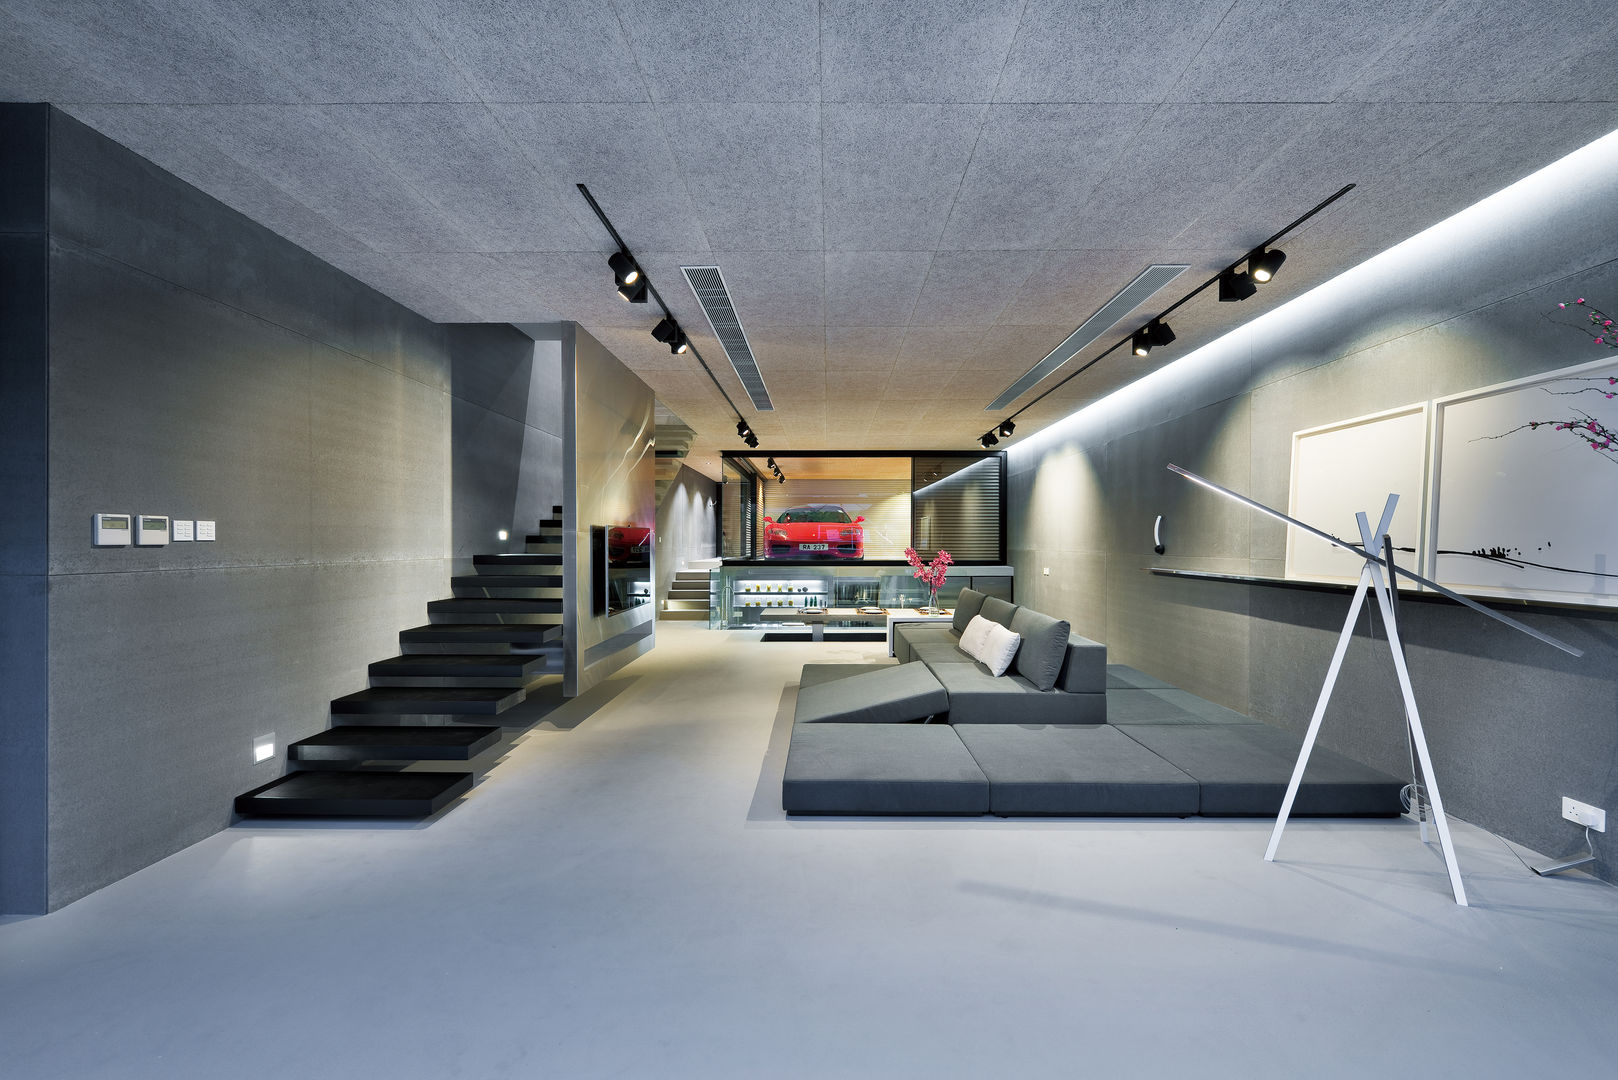 Magazine editorial - House in Sai Kung by Millimeter, Millimeter Interior Design Limited Millimeter Interior Design Limited Modern living room Automotive design,Interior design,Building,Flooring,Floor,Fixture,Ceiling,Space,Engineering,Design